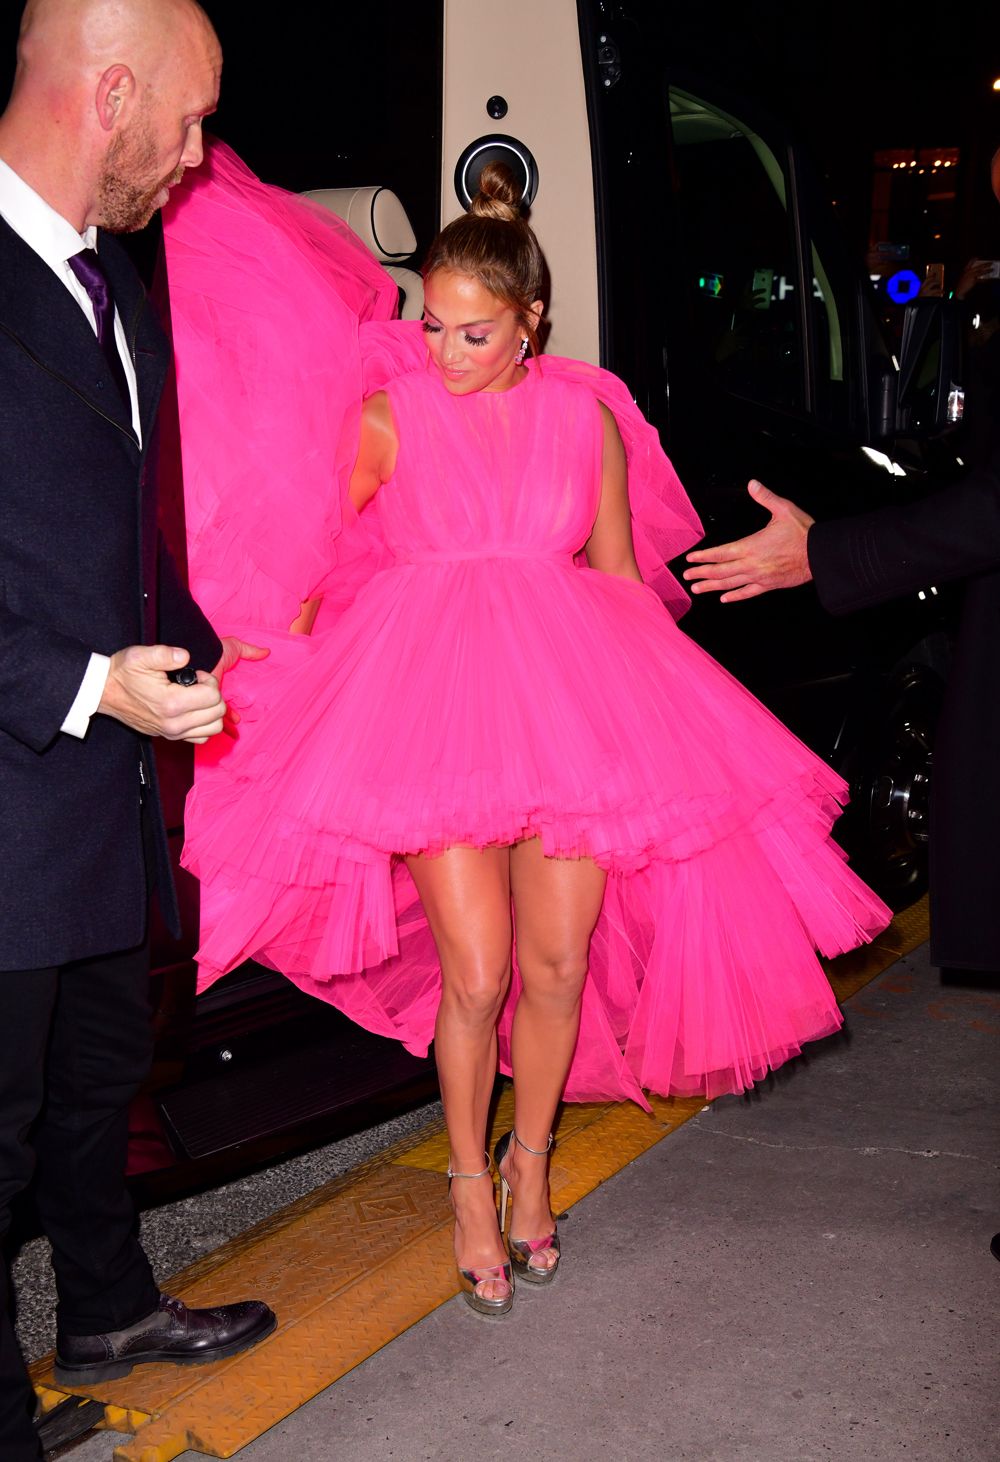 jlo pink outfit